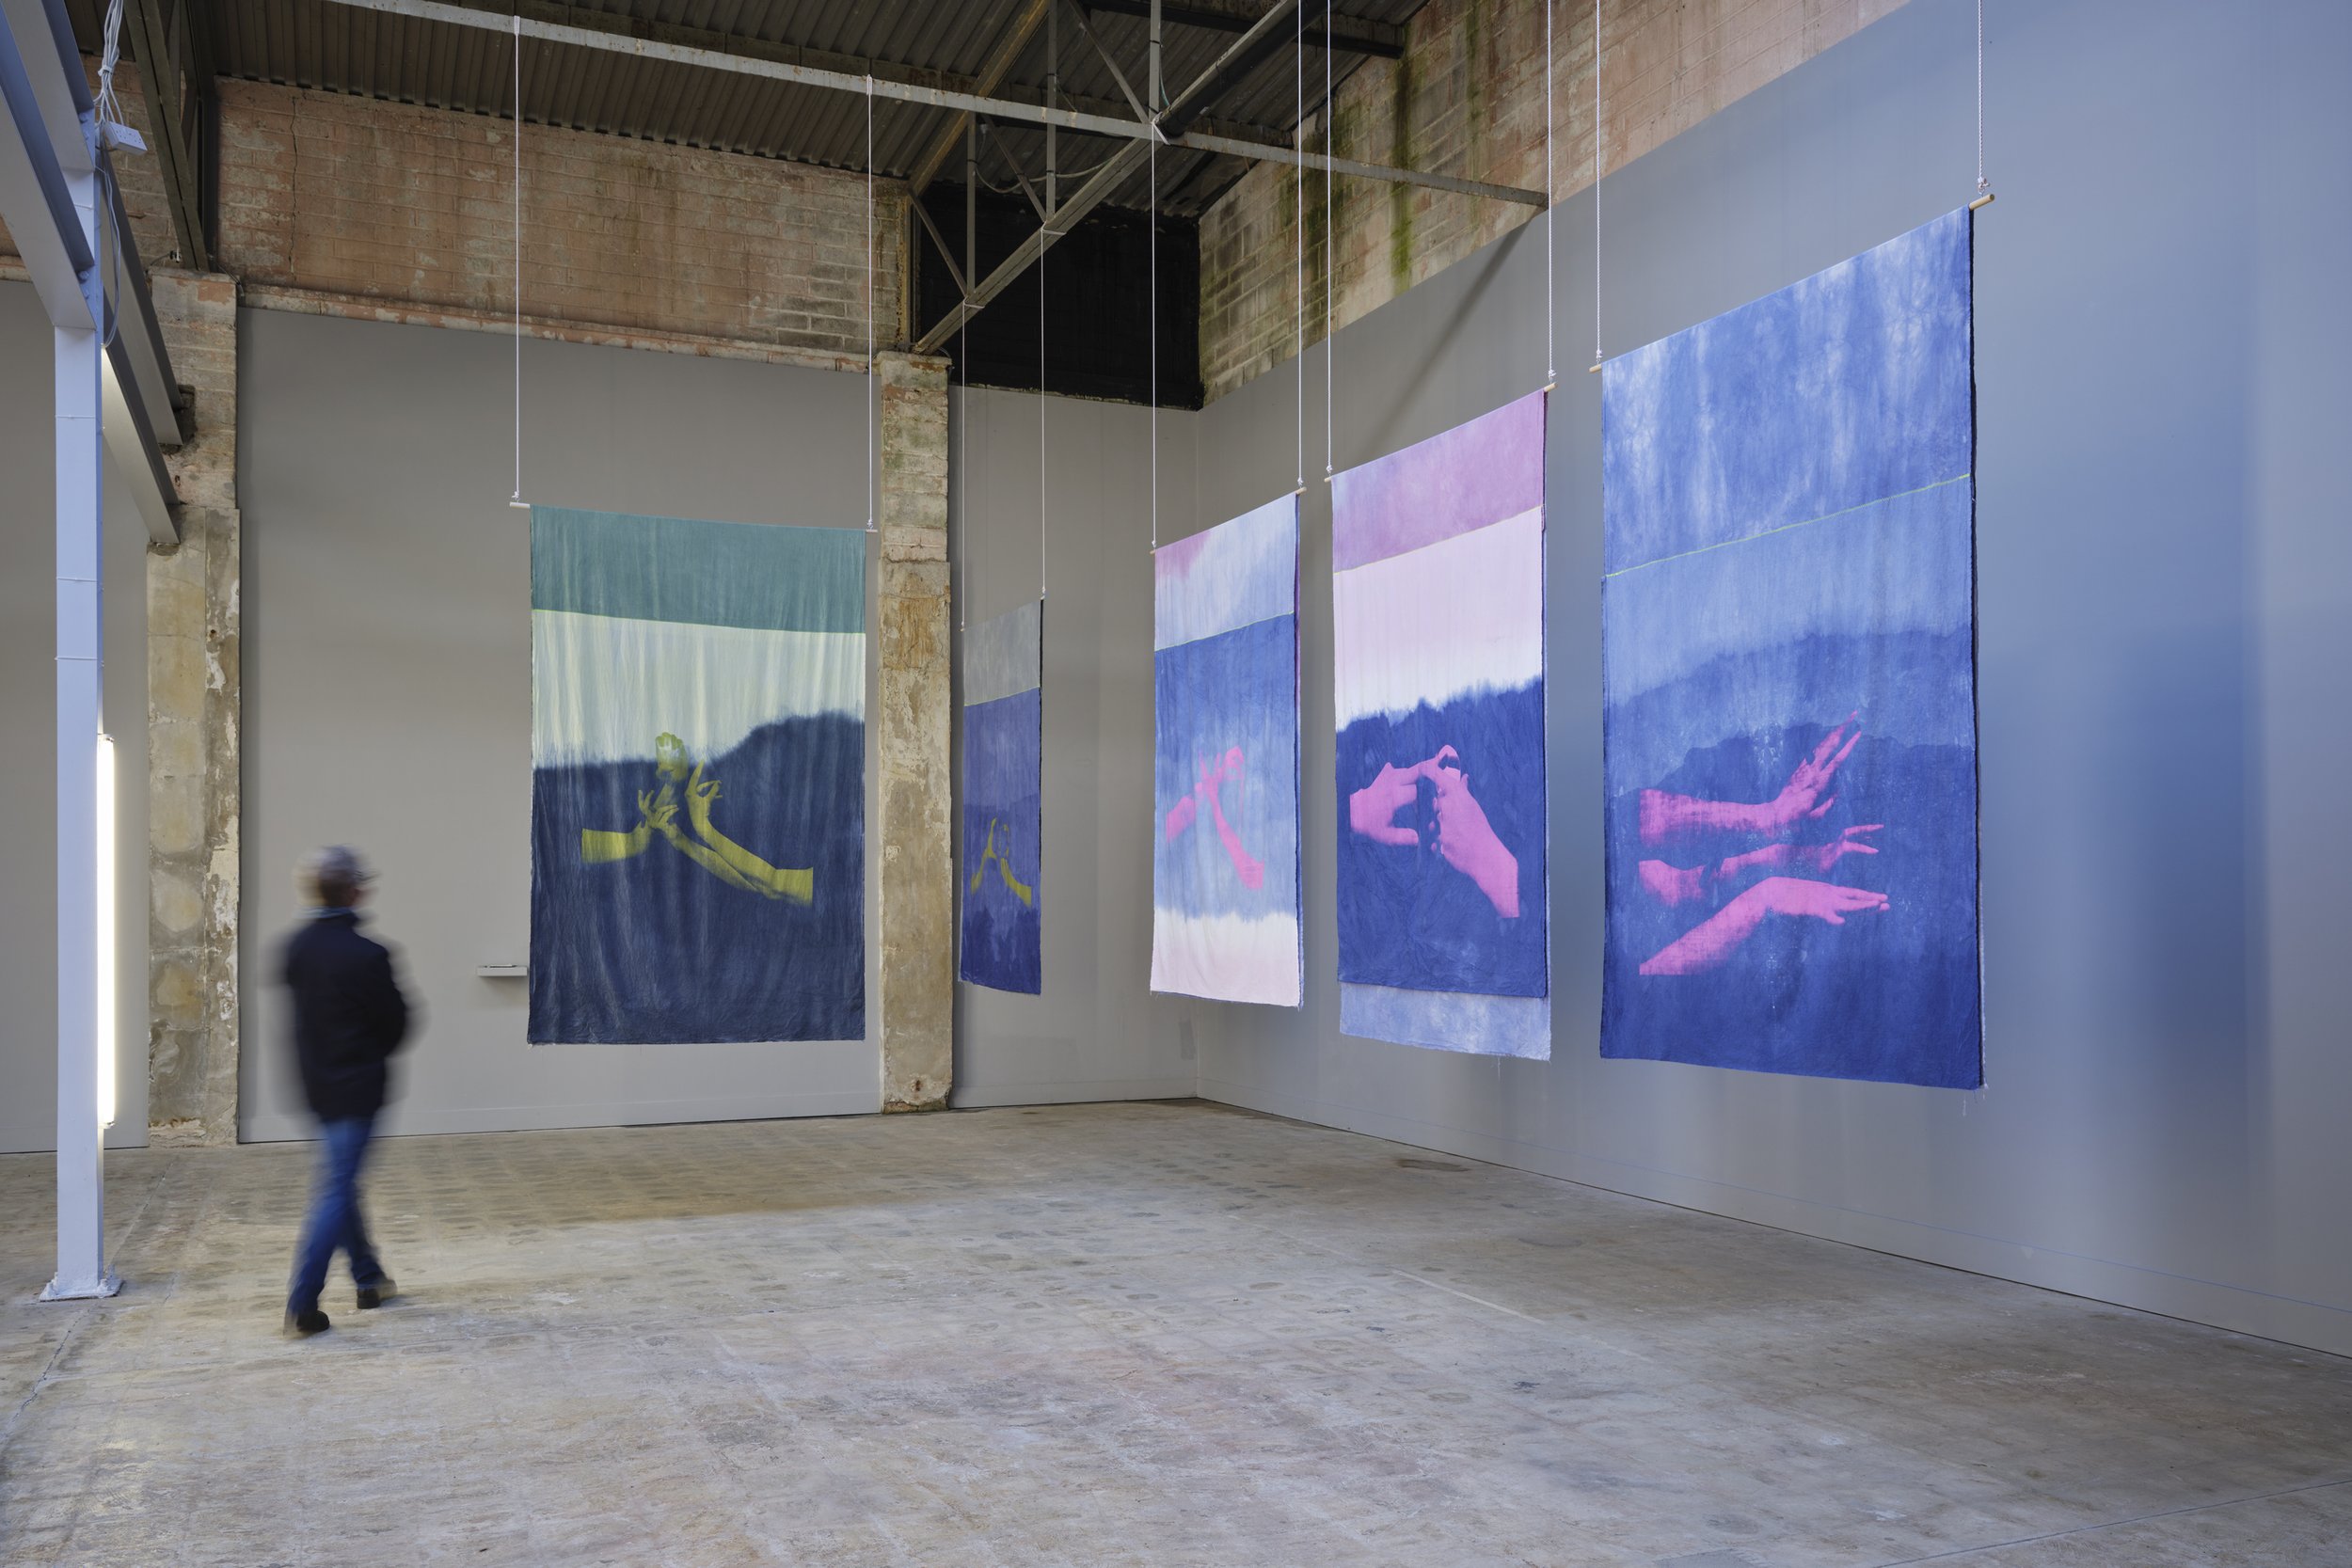  The Many Headed Hydra,&nbsp;Oracle Flags, 2017, hand-dyed cotton, screen printed images, wood and rope, with accompanying publications, installation view at An Post Gallery, November 2021; photograph by Ros Kavanagh, courtesty of the artists and TUL